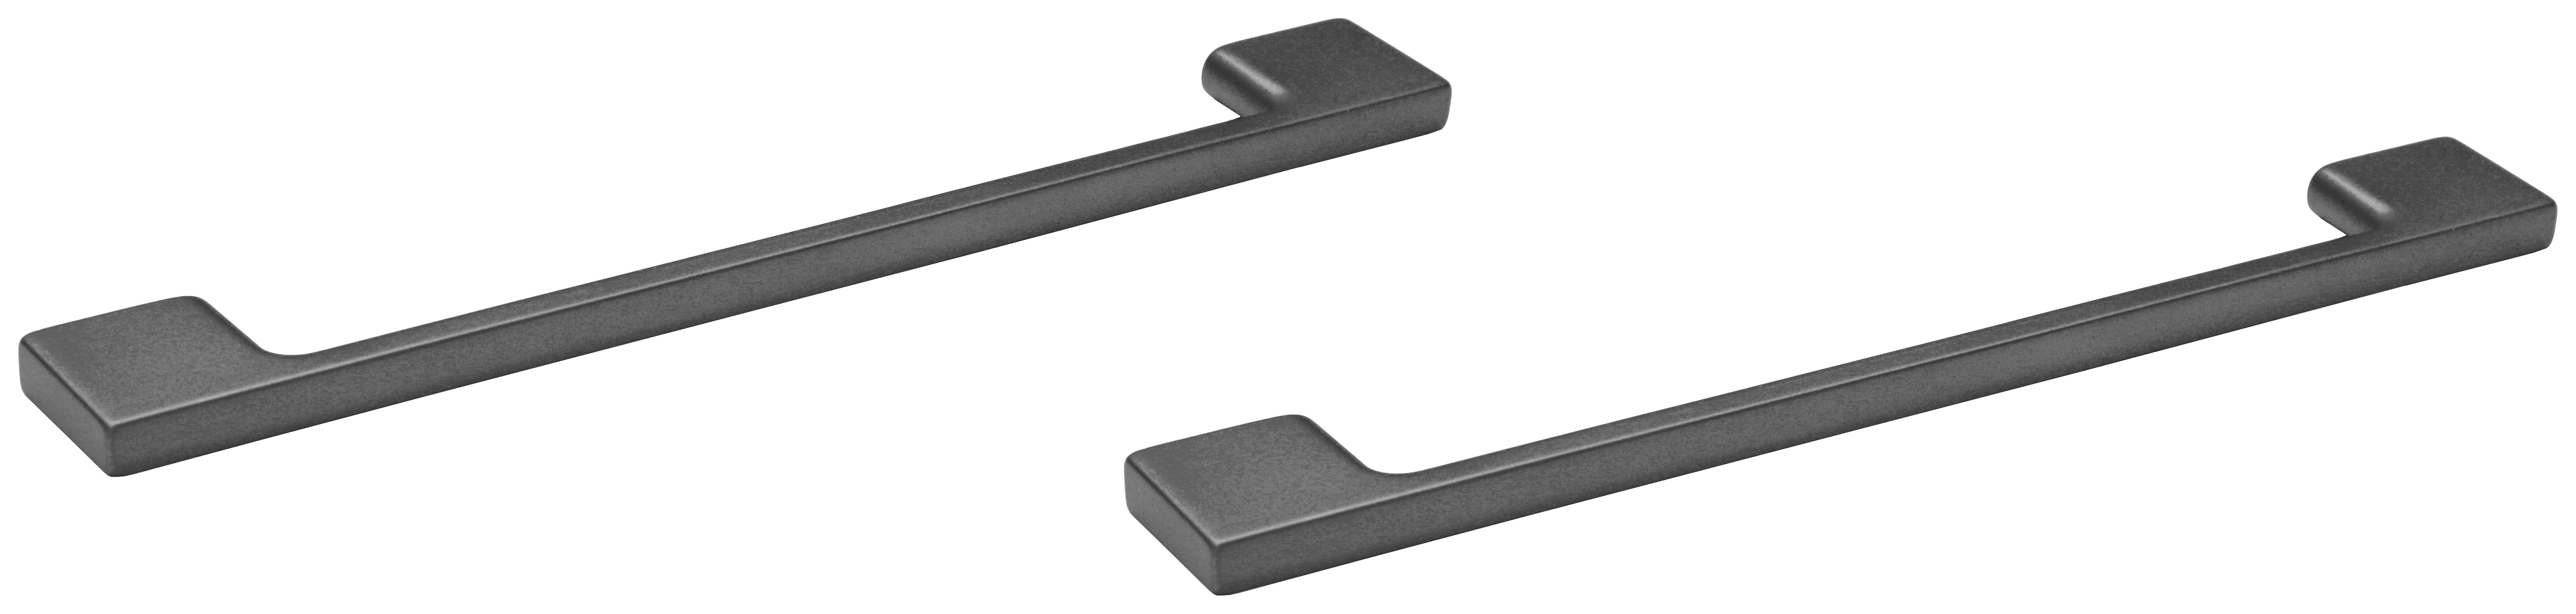 Image of Abacus Concept Matt Anthracite Bathroom Furniture Handle for Freestanding Unit - Pack of 2